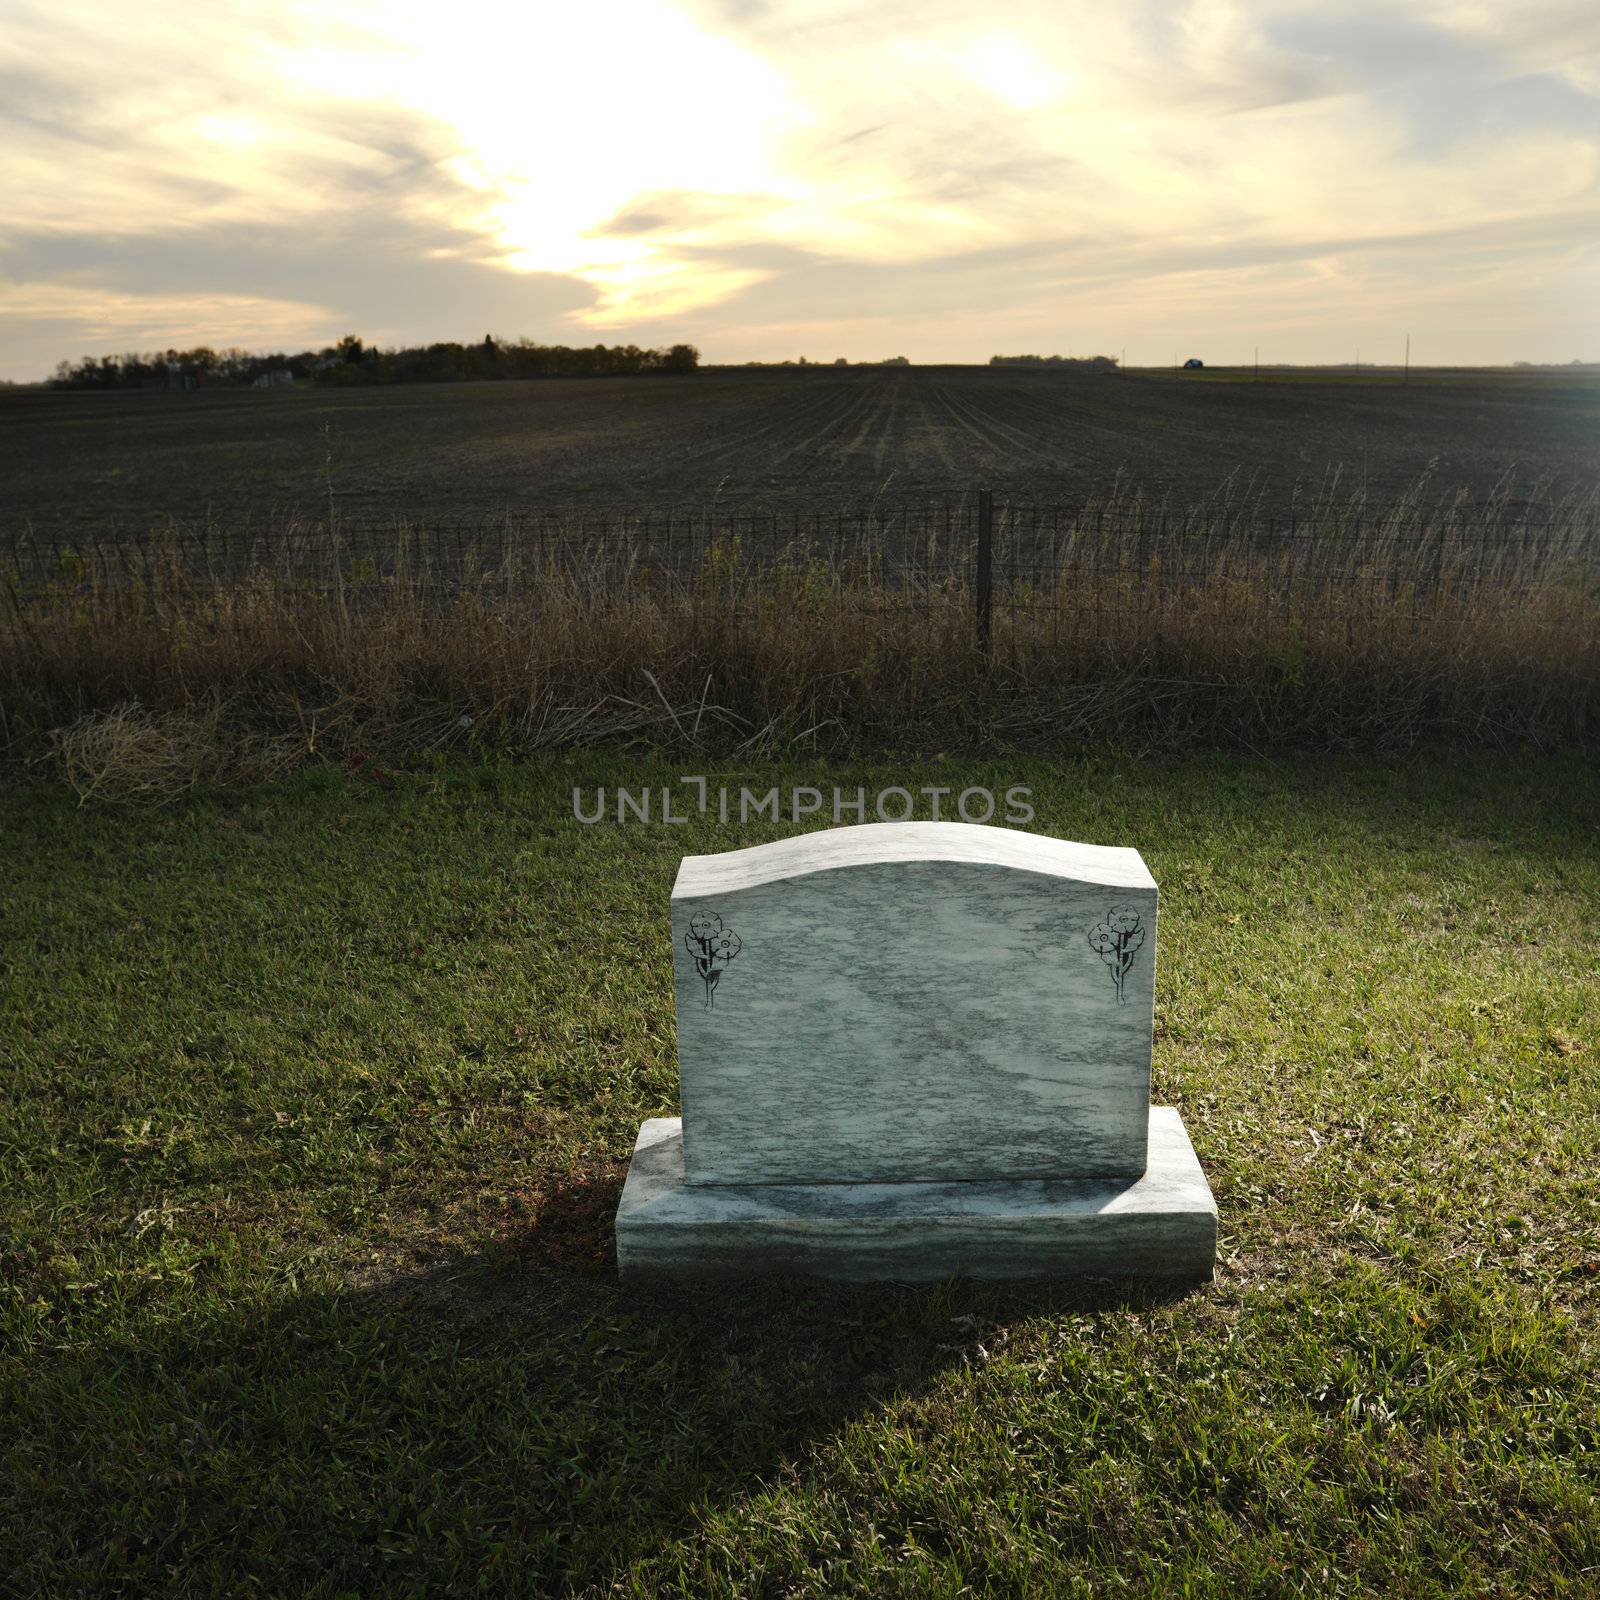 Headstone marking grave in rural countryside at sunset.